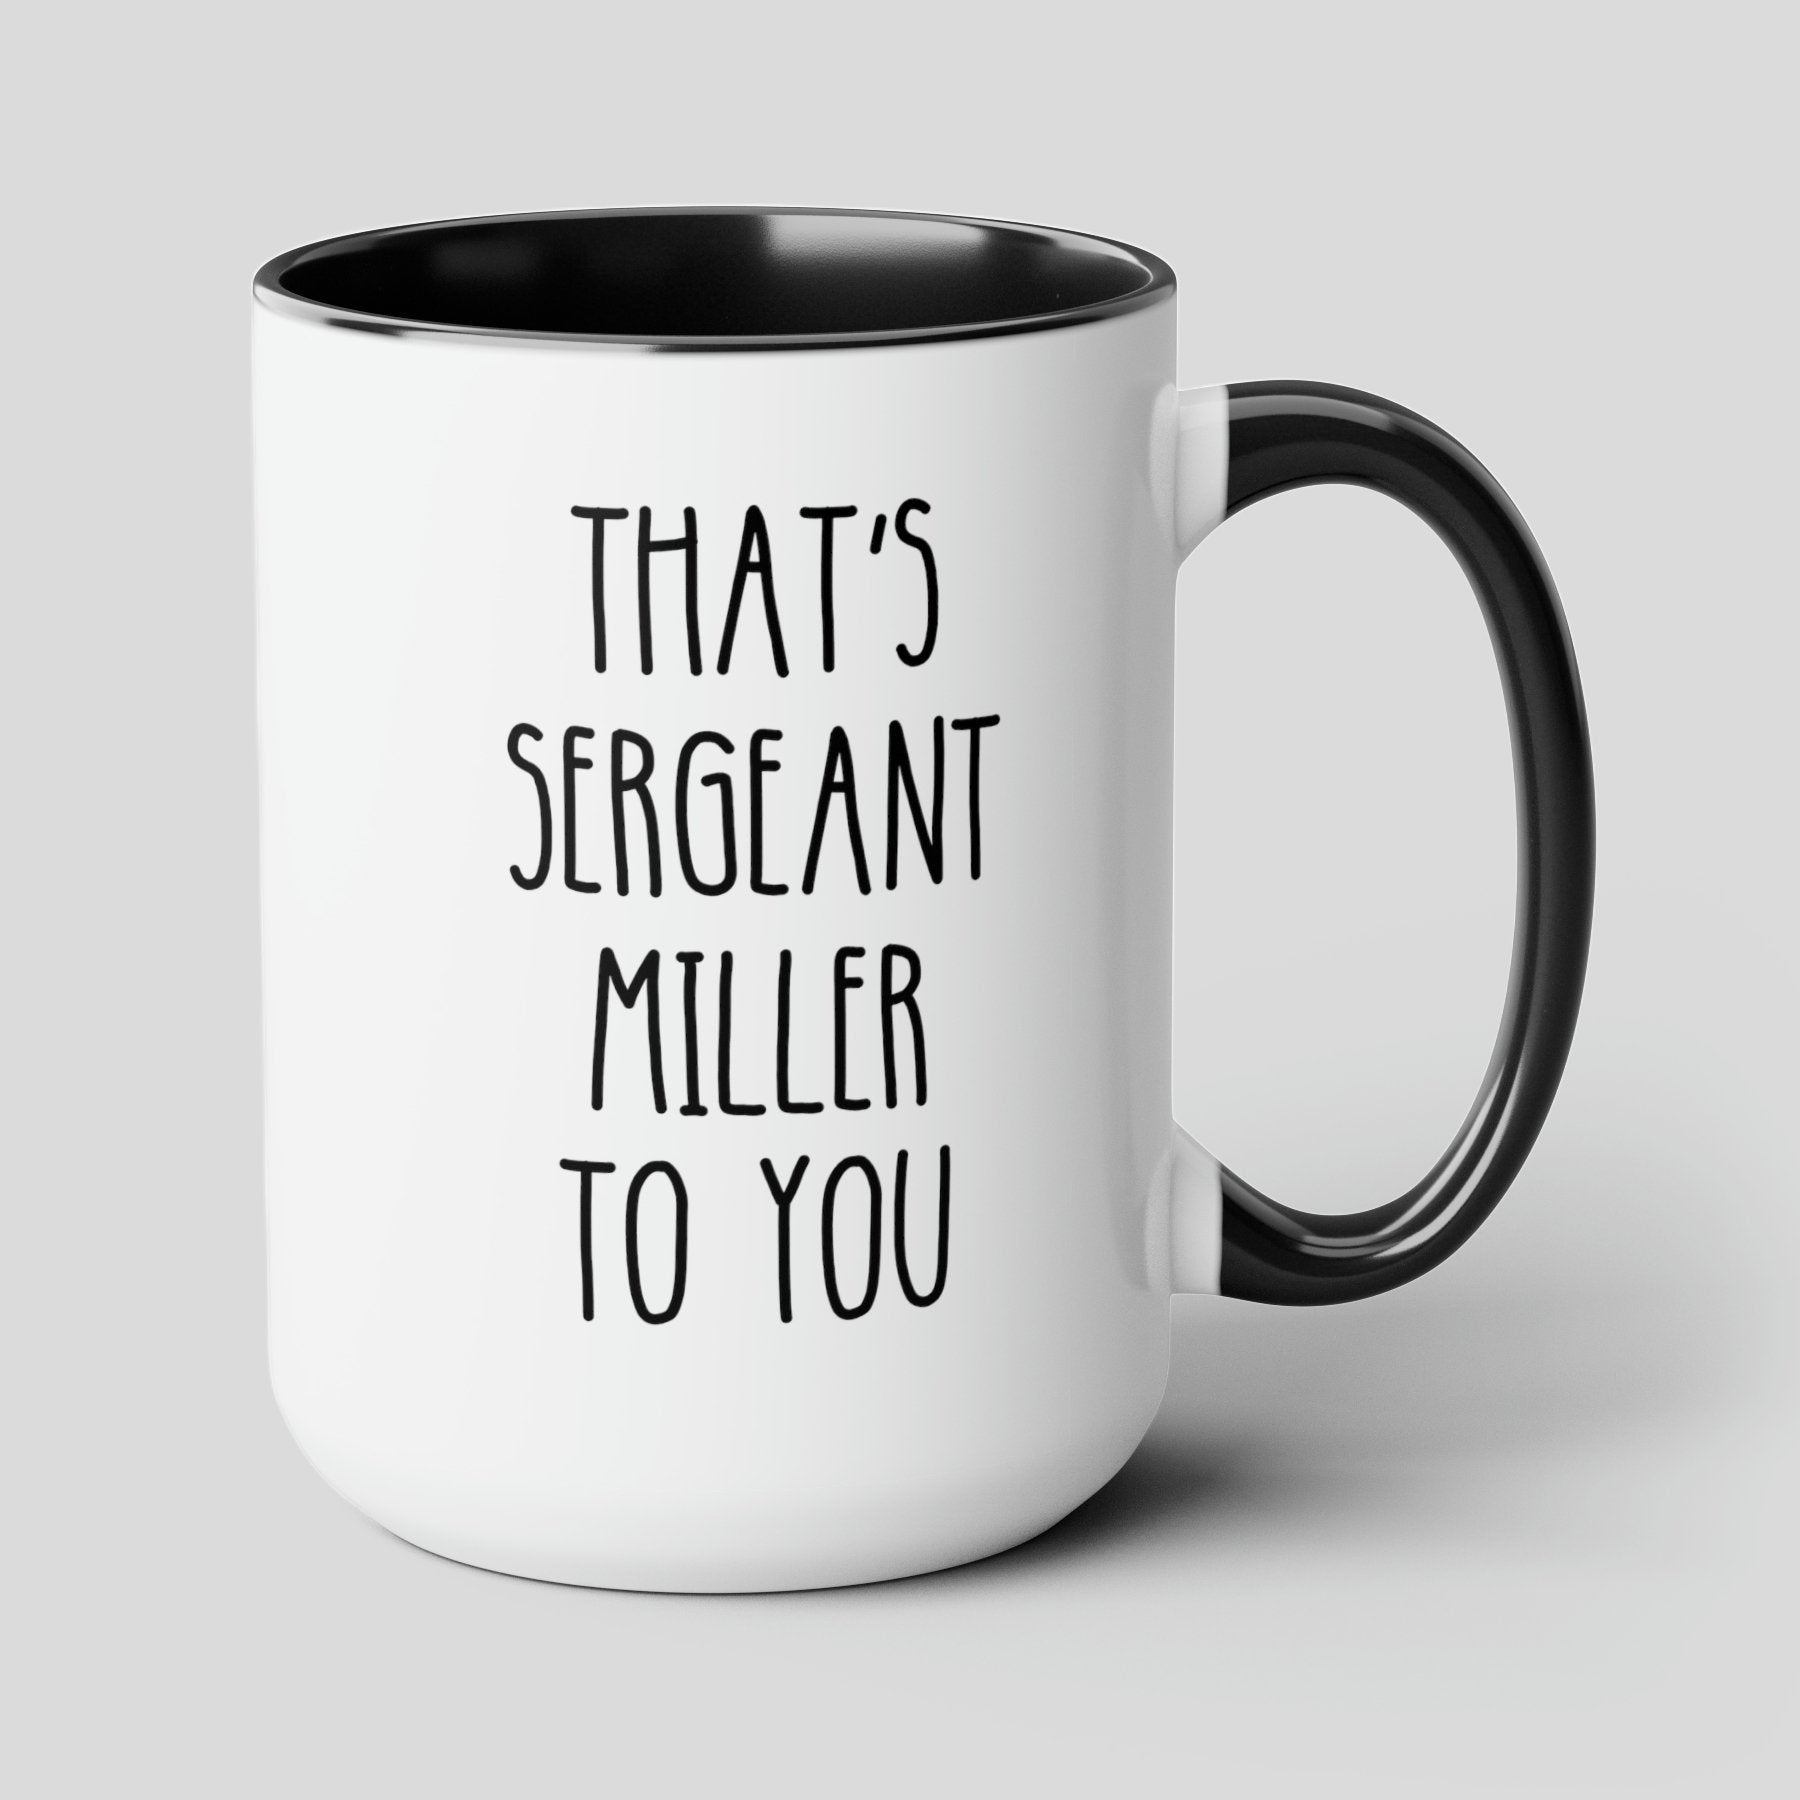 Thats Sergeant Miller To You 15oz white with black accent funny large coffee mug gift for sergeant cop police promotion appreciation gift waveywares wavey wares wavywares wavy wares cover